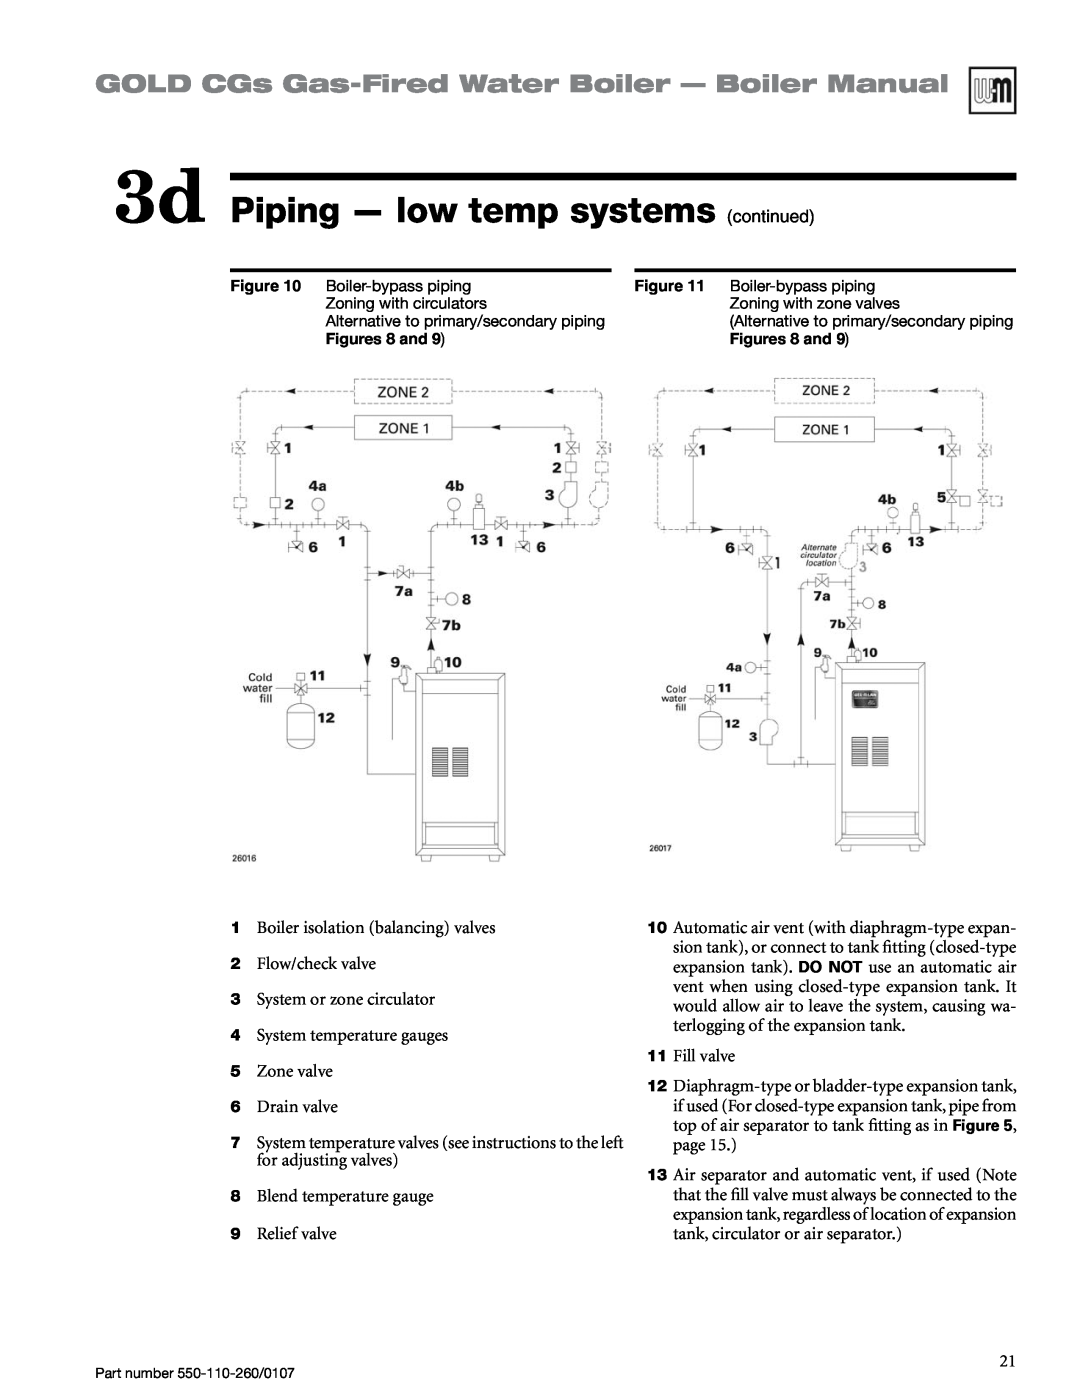 Weil-McLain 550-110-260/0107 manual 3d Piping - low temp systems continued, GOLD CGs Gas-FiredWater Boiler — Boiler Manual 